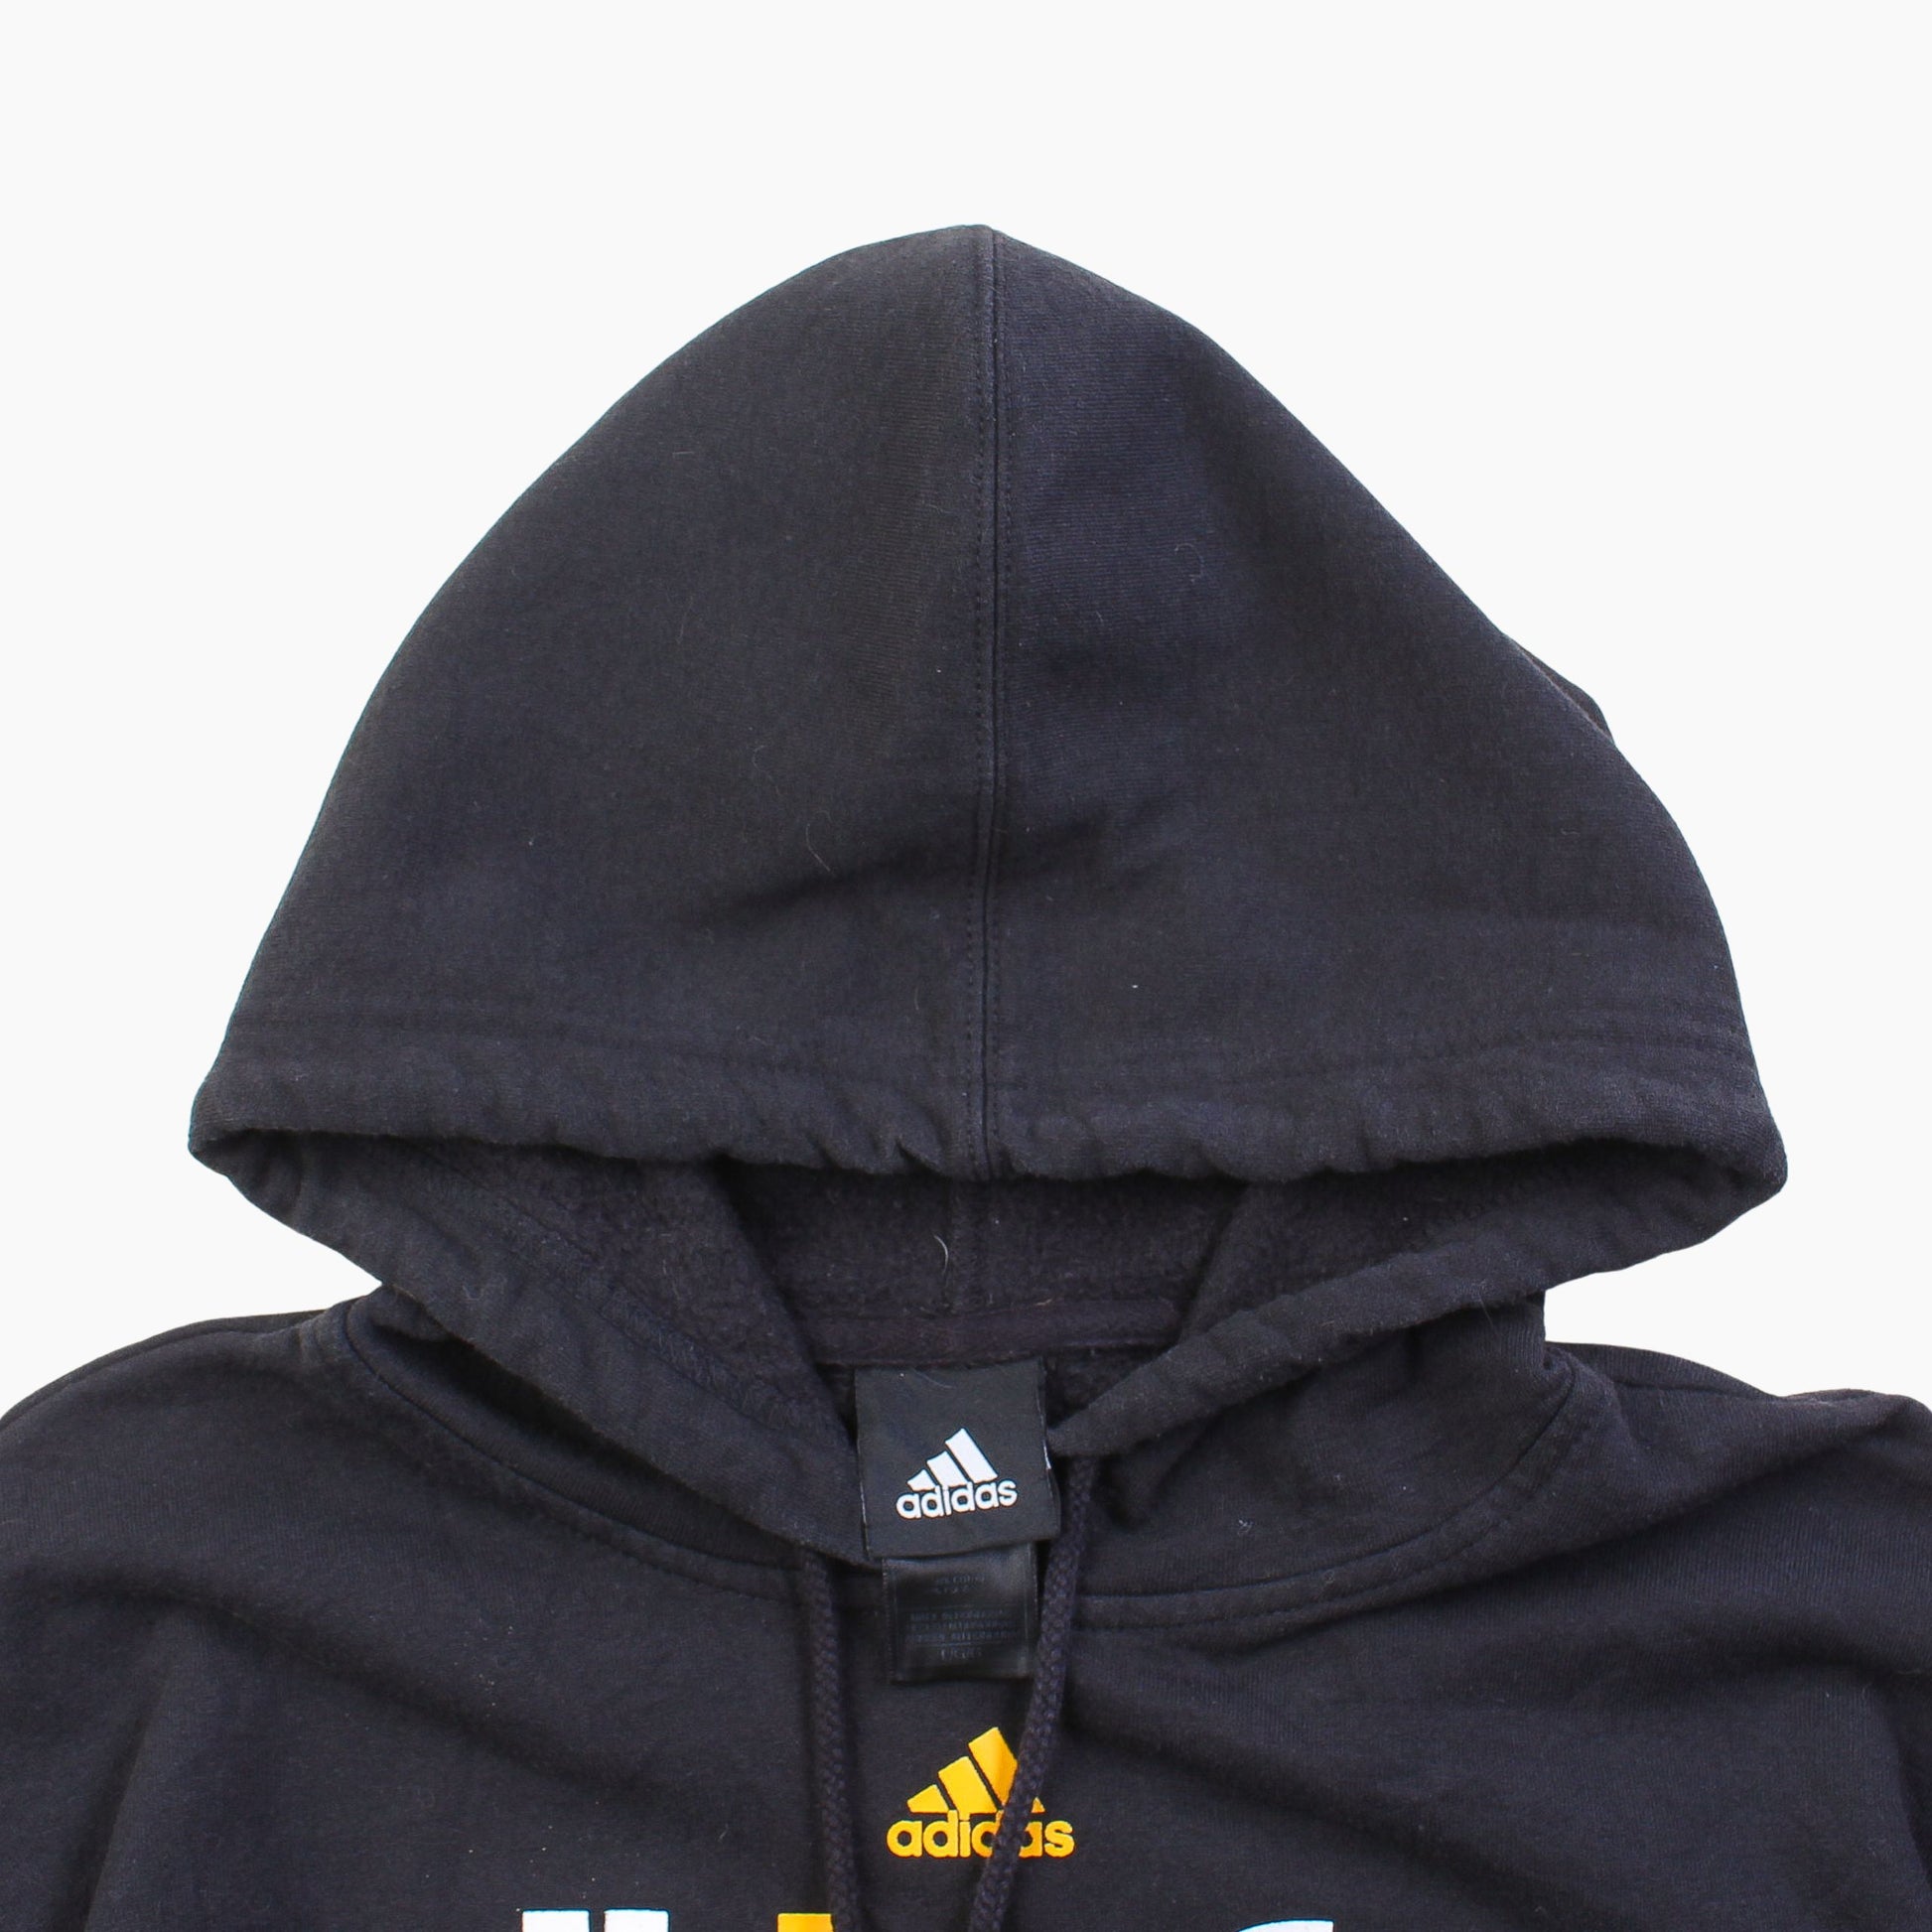 Vintage 'All in for West Virginia' Adidas Graphic Sweatshirt - American Madness